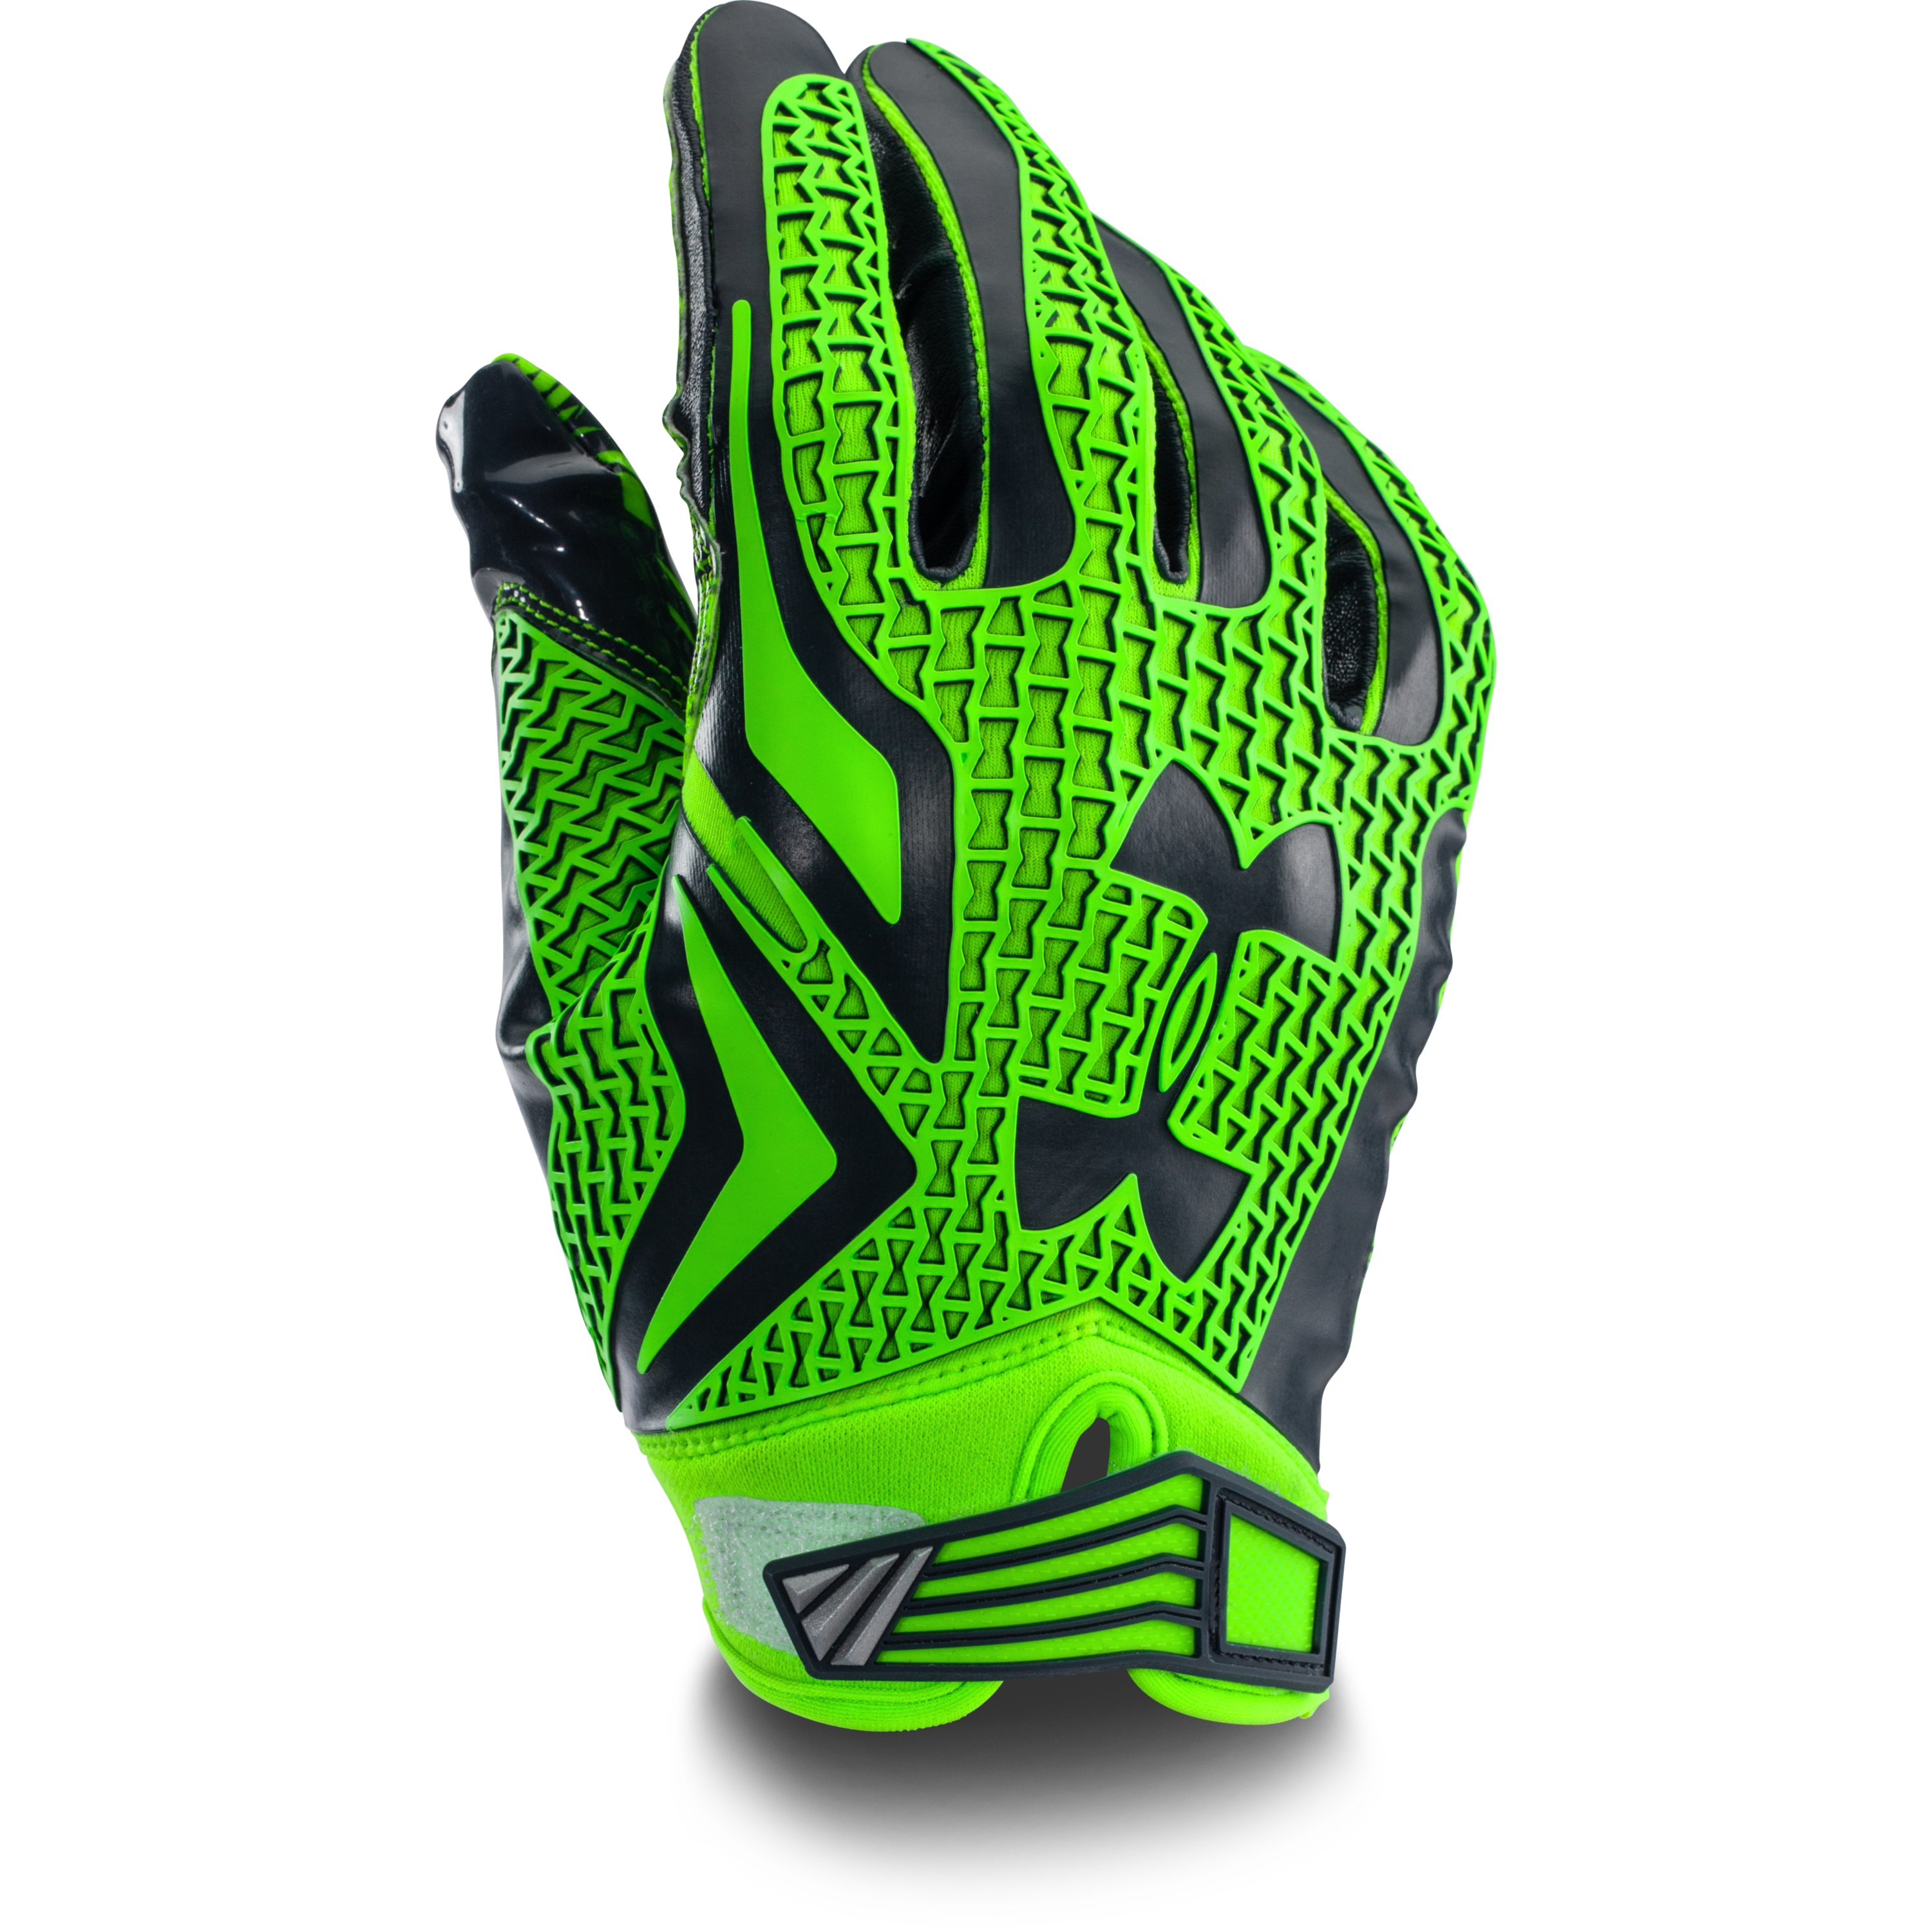 Details about   Under Armour UA Swarm Football Gloves Adult SZ Large Green/White New 1260677-301 